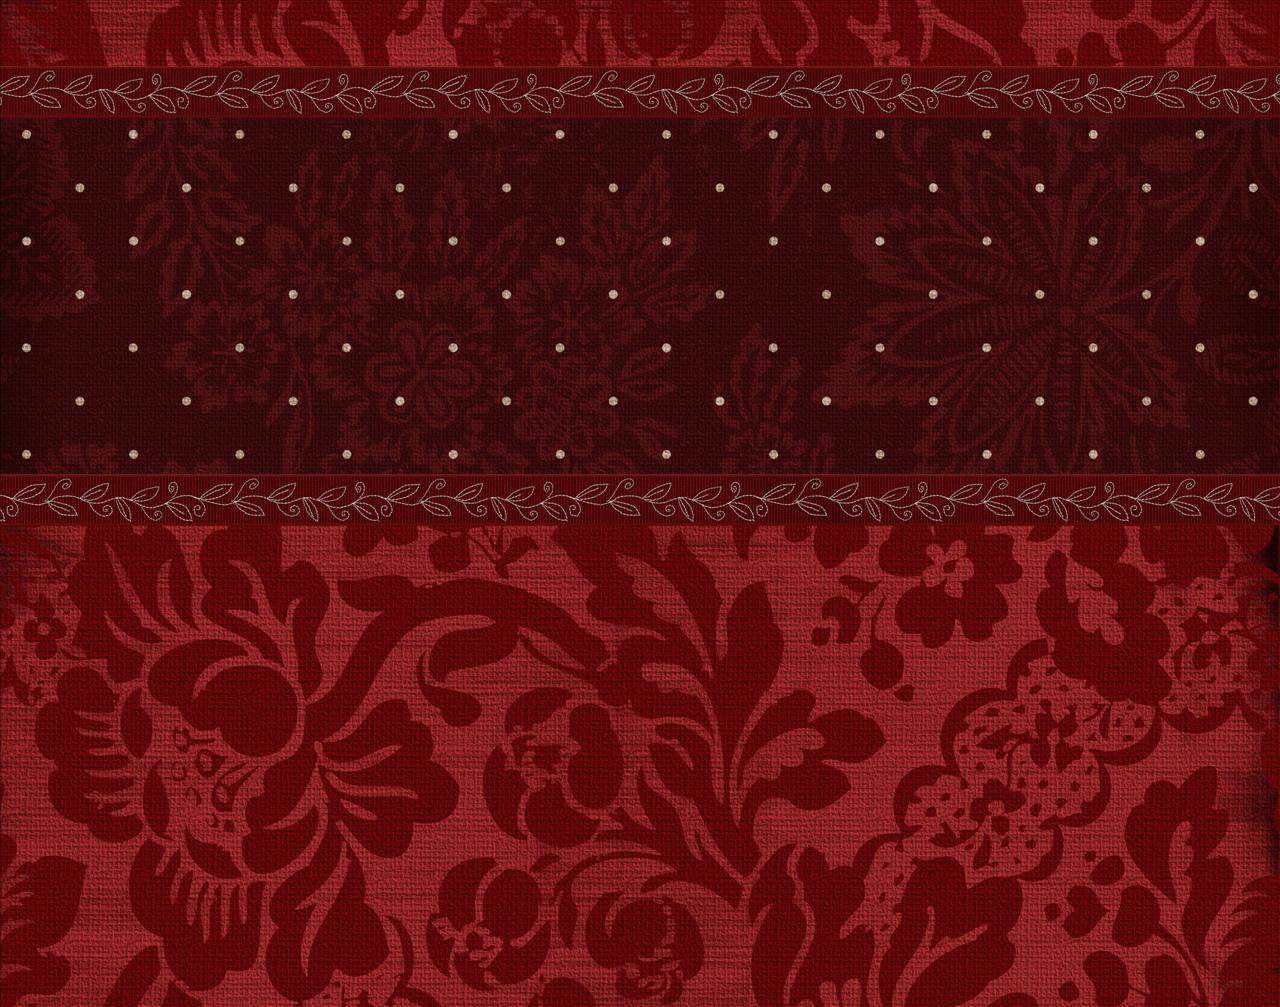 Rich Reds - About Time free powerpoint background